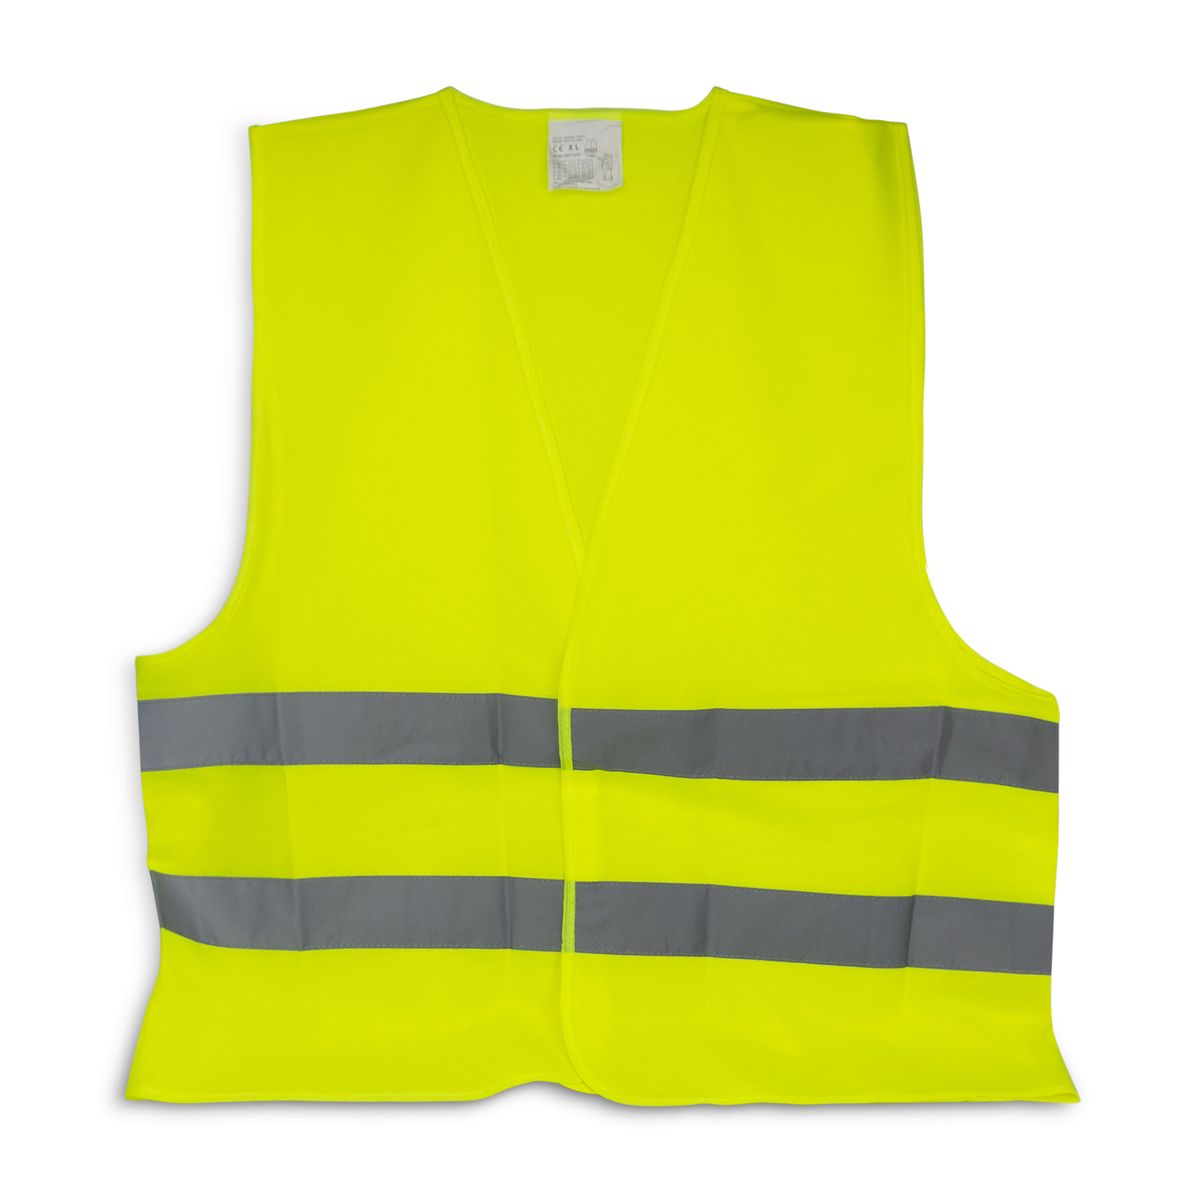 Visible Reflective Safety Vest - One-Size-Fits-All | Shop Today. Get it ...